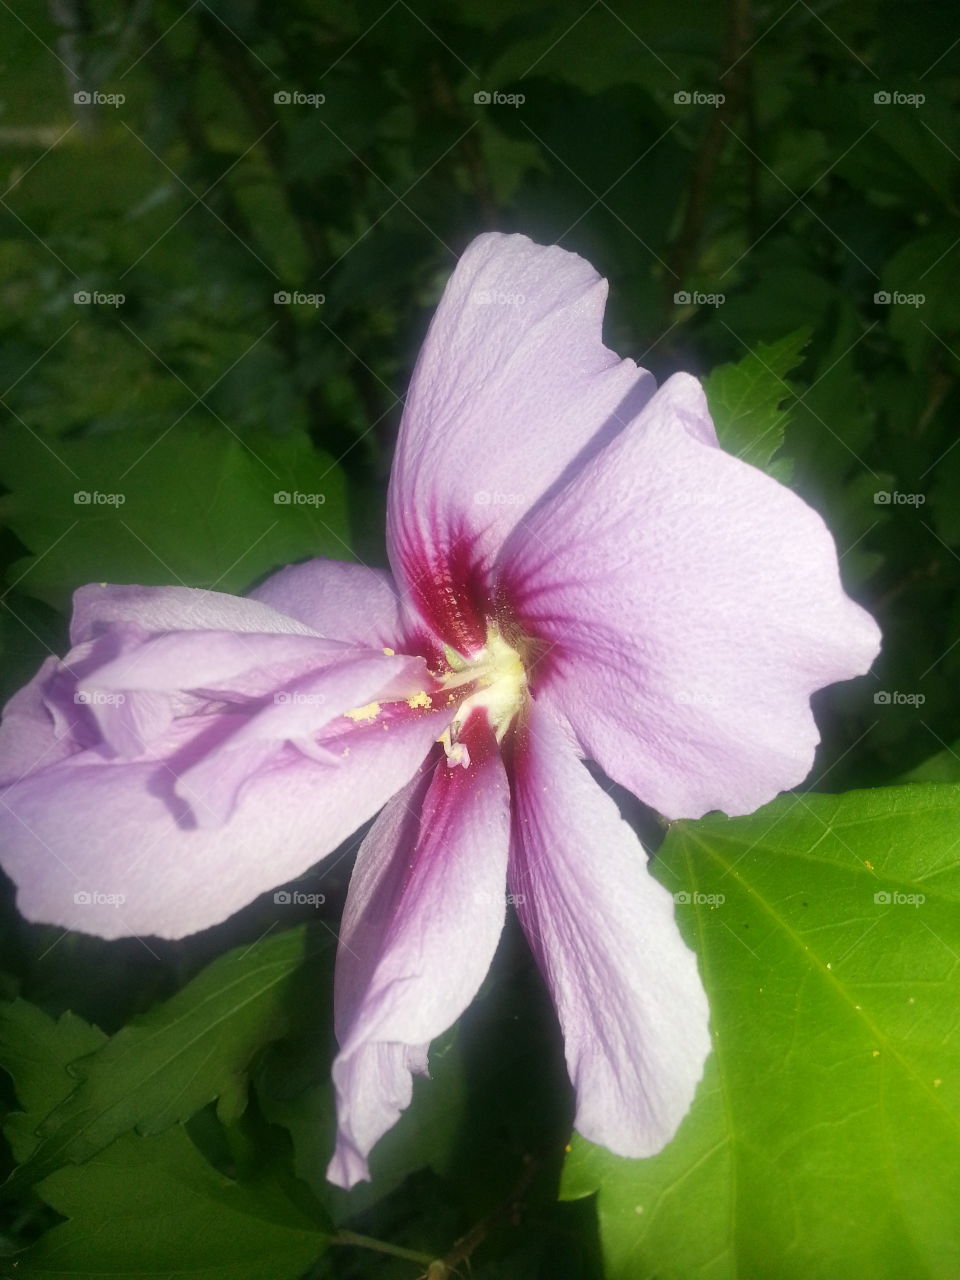 Althea Bush flower. My Althea Bush is filled with these beautiful purple flowers!